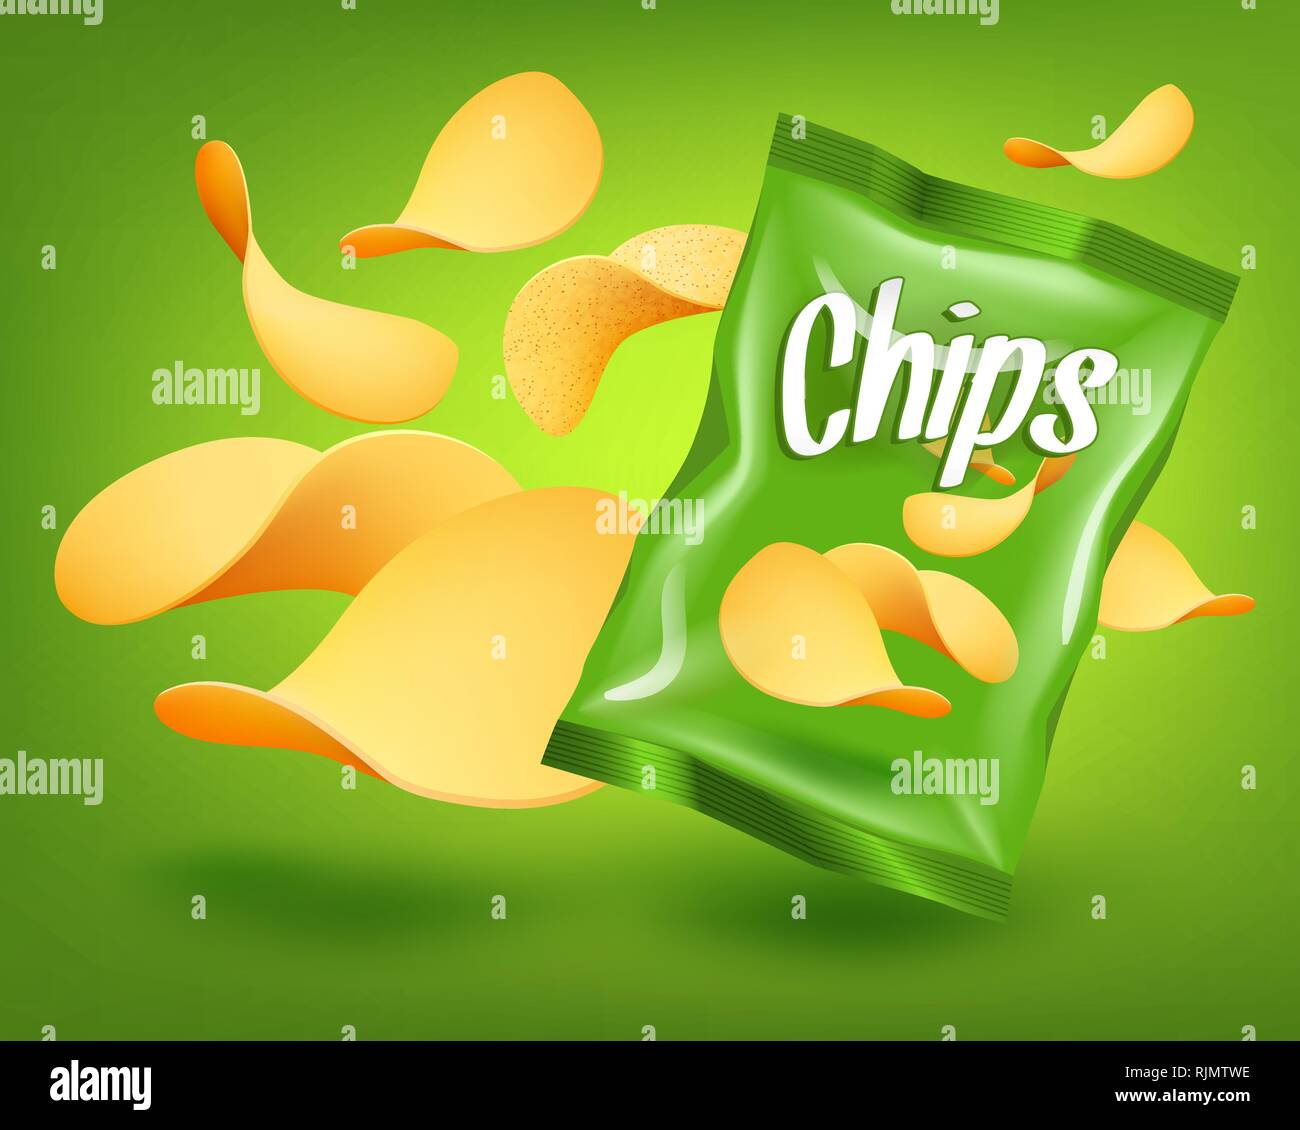 Download Green Chips Package Mockup With Yellow Crispy Snacks Advertising Concept Stock Vector Image Art Alamy Yellowimages Mockups